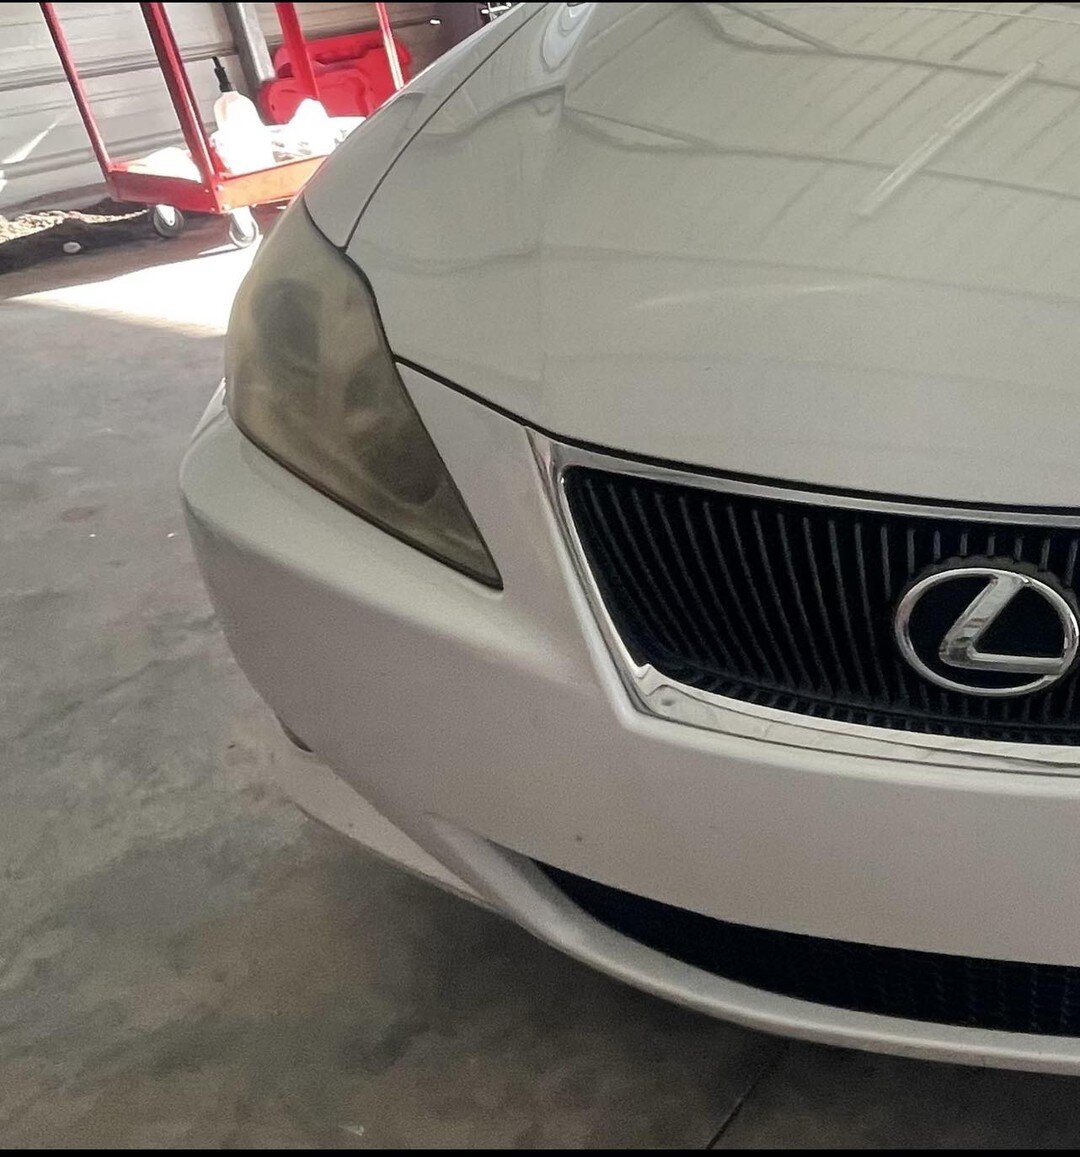 Having trouble seeing at night with cloudy damaged headlights from the harsh sun. Let Gratus do a full headlight restoration with added UV protectant to keep your lights looking new! Give us a call 912-268-0008. 

Lexus before/afters